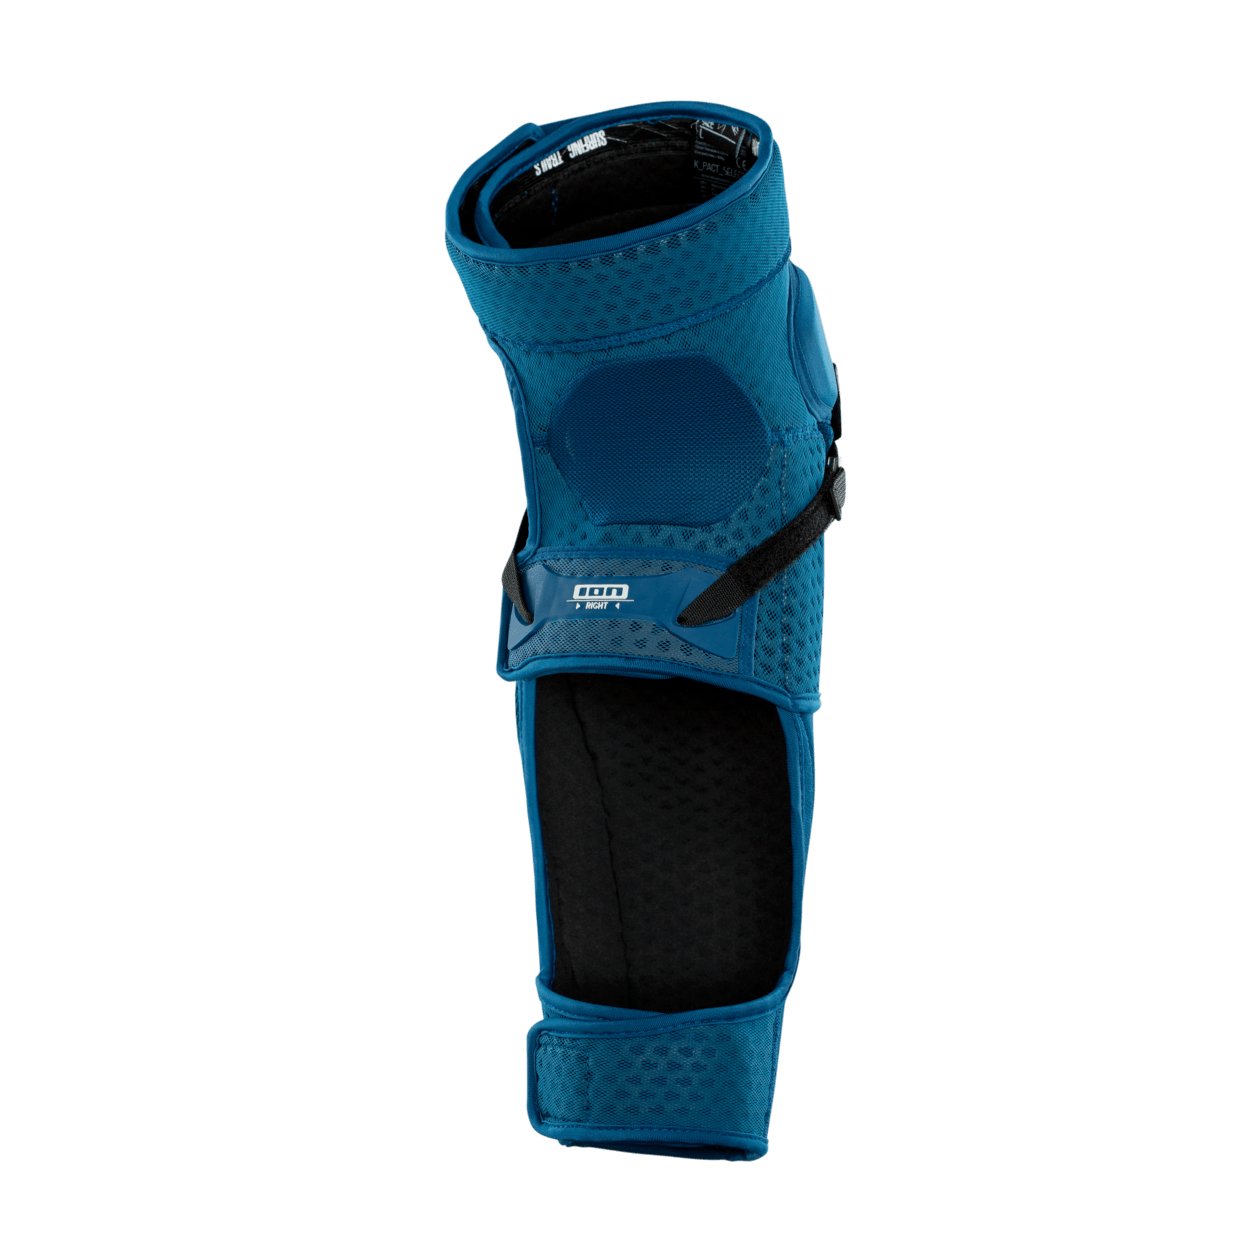 ION MTB Knee Pads K-Pact Select 2024 - Worthing Watersports - 9008415827961 - Body Armor - ION Bike